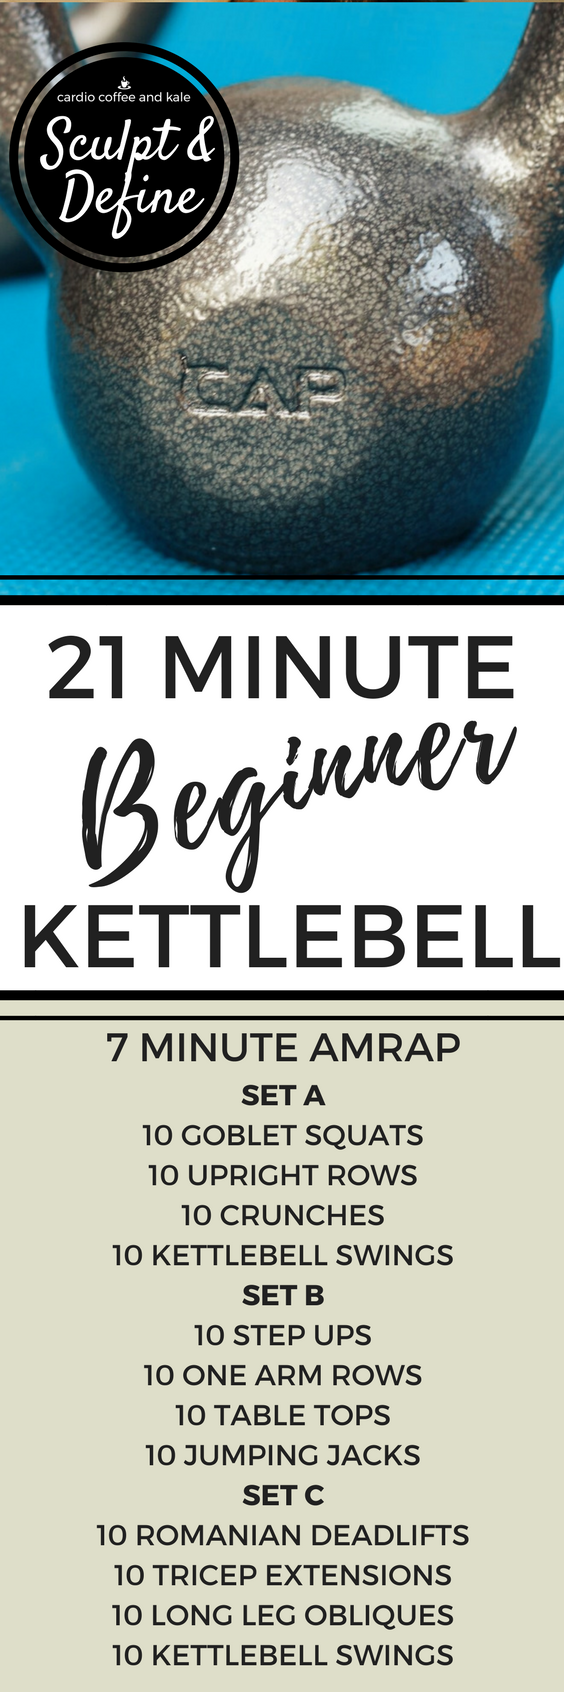 21 Minute Beginner Full Body Kettlebell Workout cardio coffee and kale